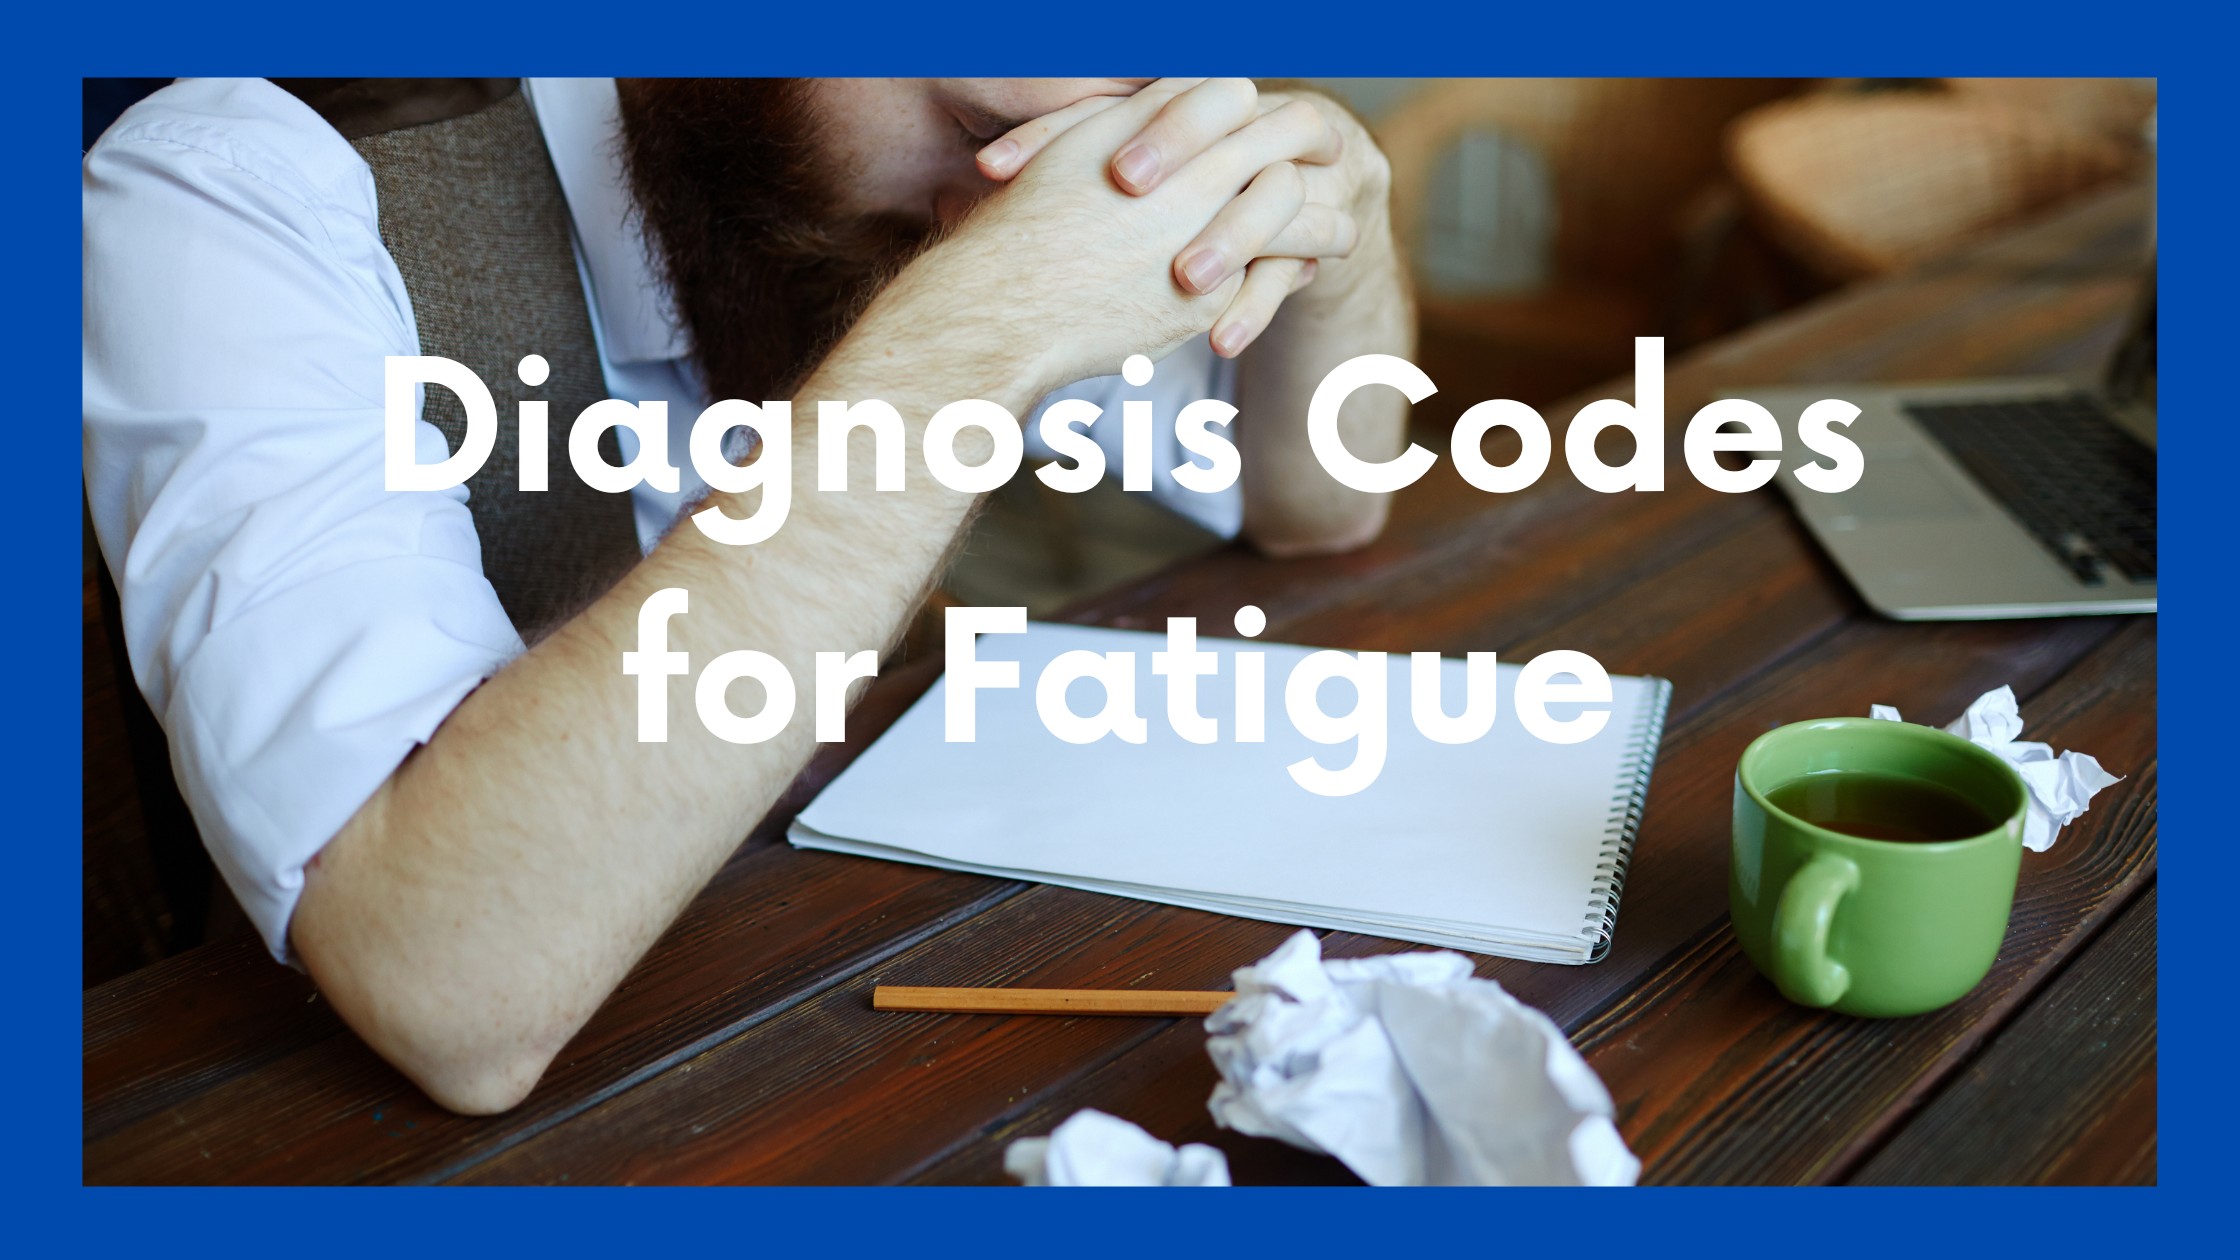 ICD-10 code for fatigue